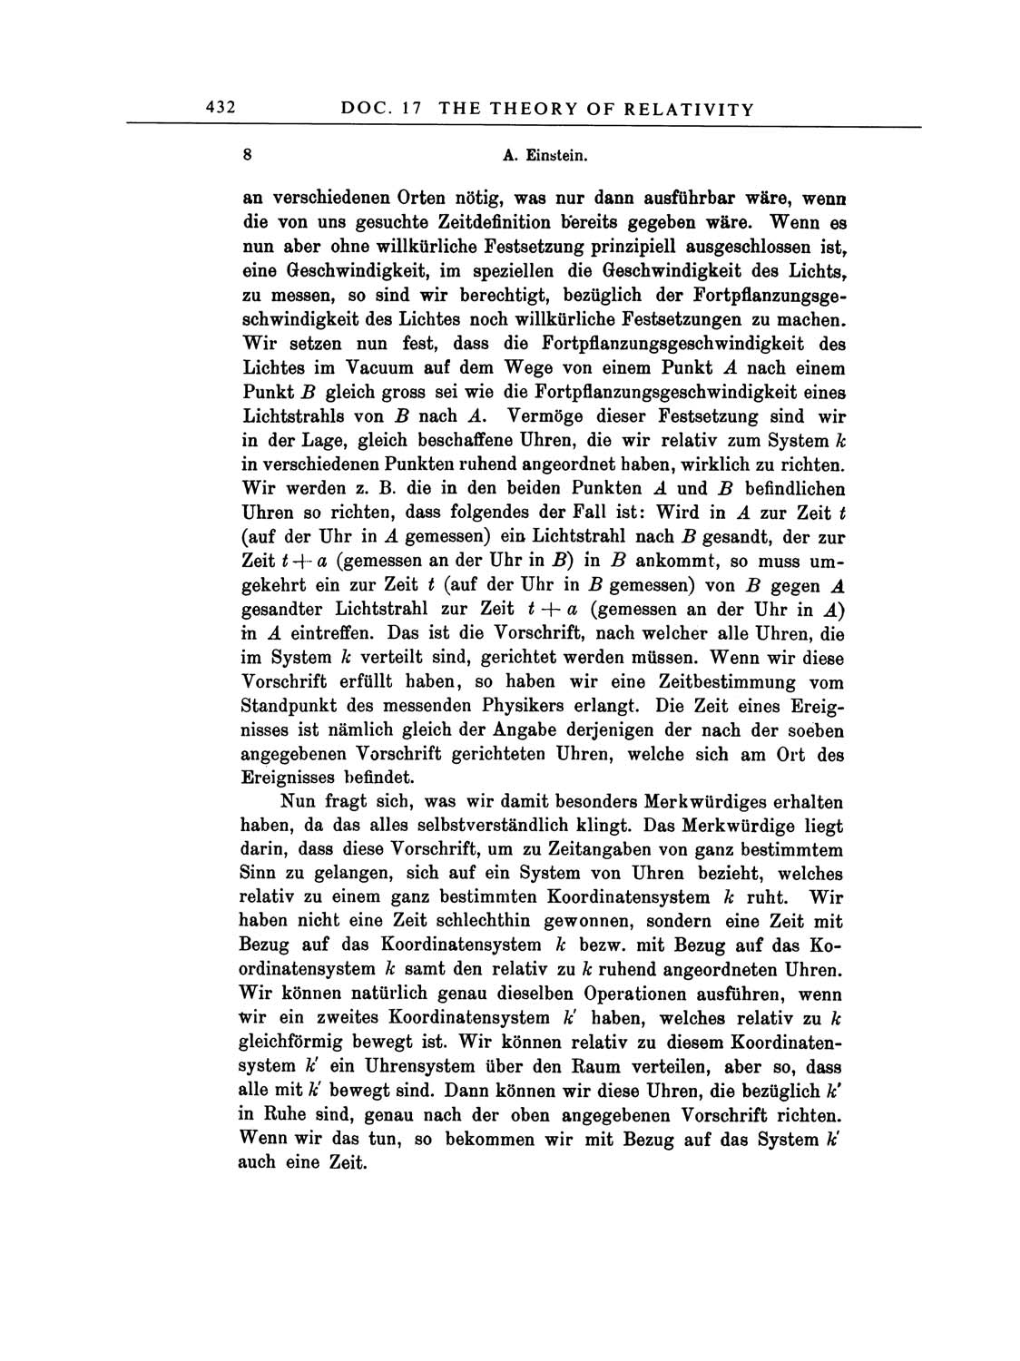 Volume 3: The Swiss Years: Writings 1909-1911 page 432